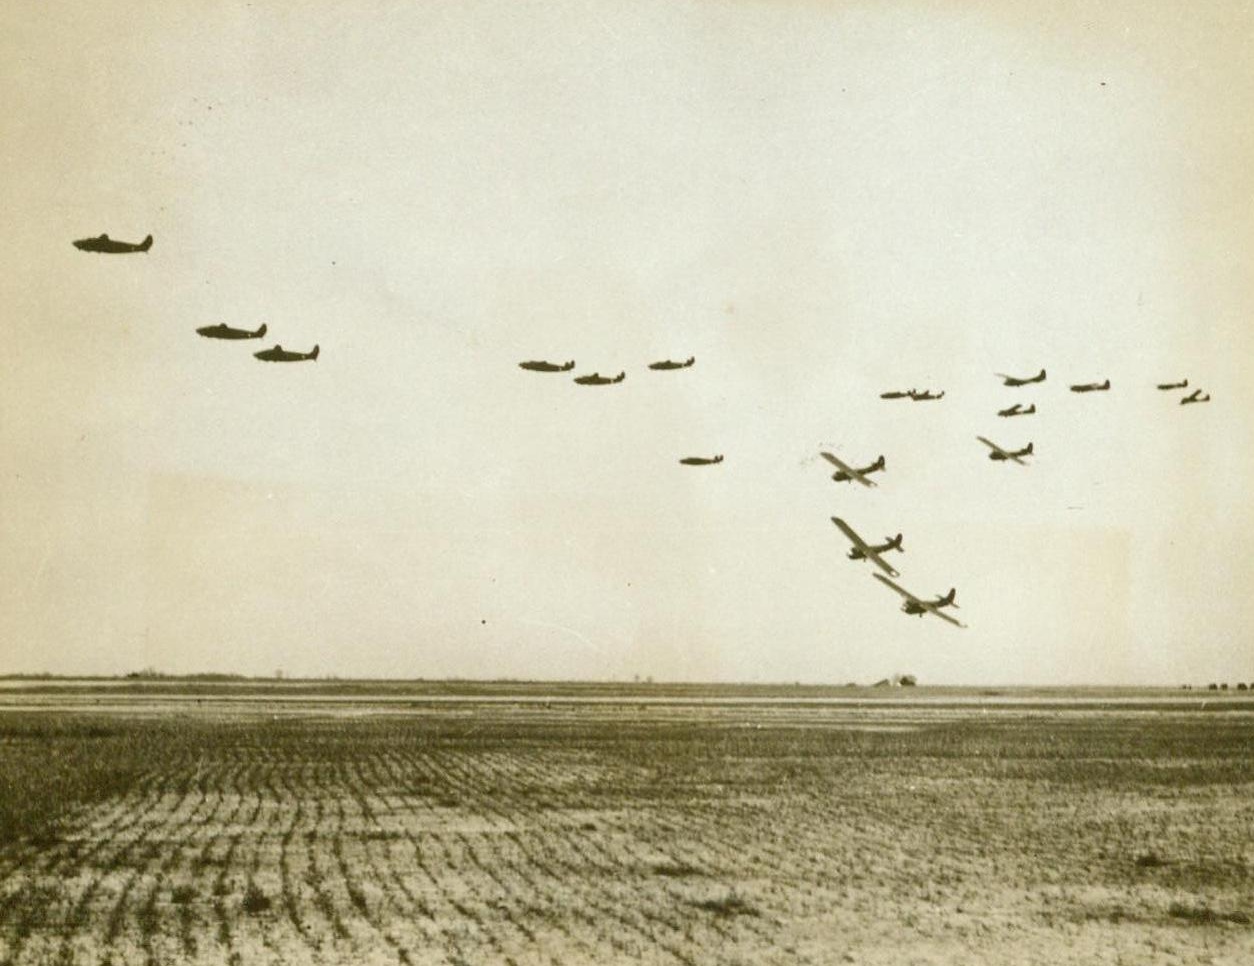 Glider Troops Prepare For Invasion, 6/28/1943. A U.S. Glider School – Gliders, flying “freight cars” which can carry a jeep, field artillery, or a compliment of 15 men equipped as shock troops, peel off from formation to land, after releasing tow ropes attached to the bombers that towed them. These gliders are being used at a Glider Activity School in the United States, where glider troops are training for the coming invasion of Nazi-occupied Europe. 6/28/43 (ACME);